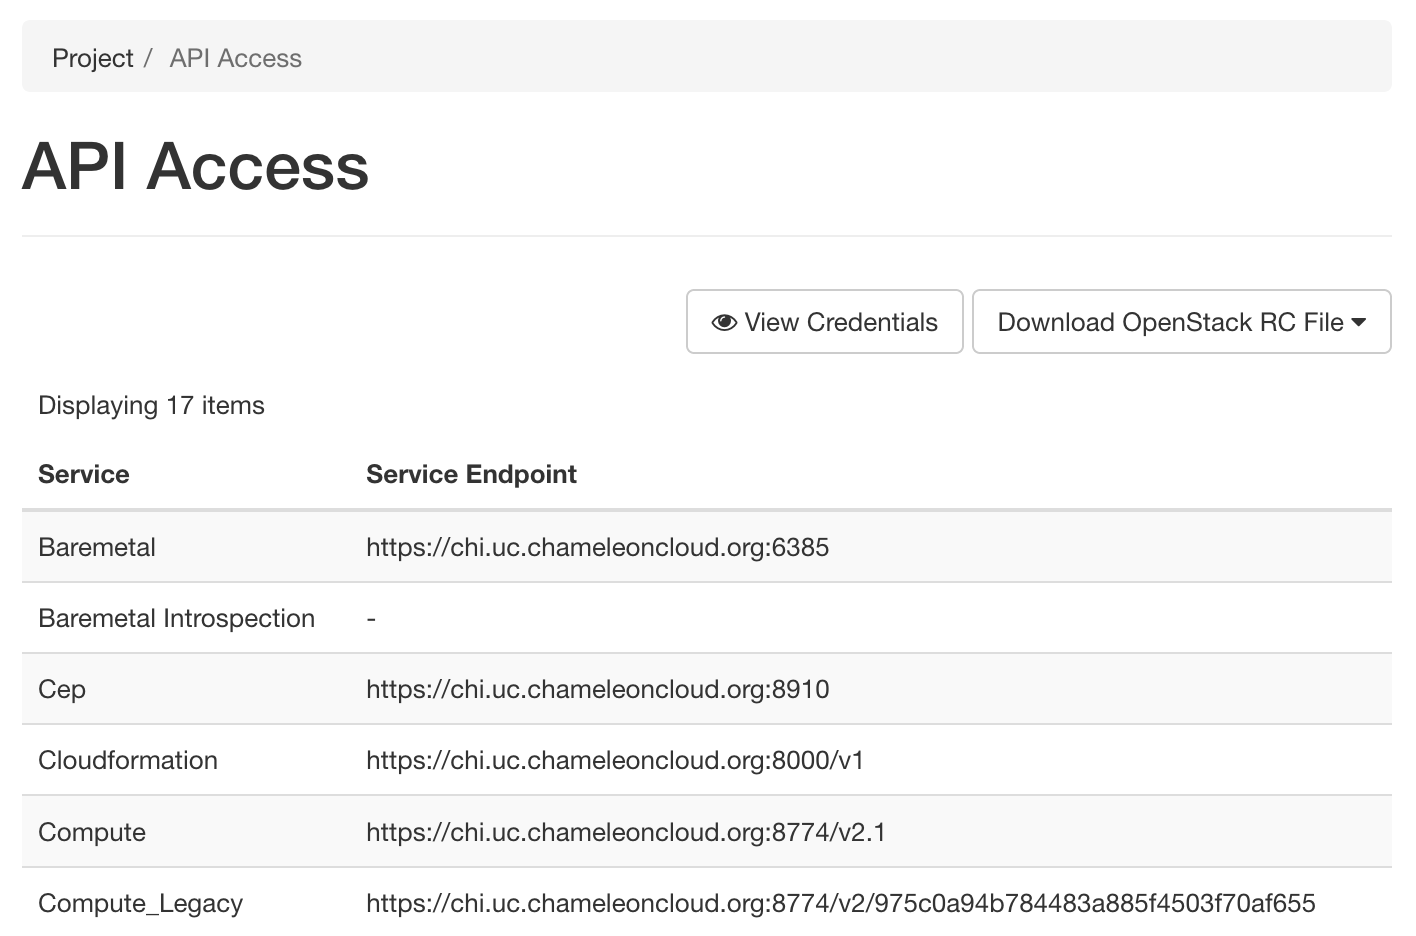 The API Access page